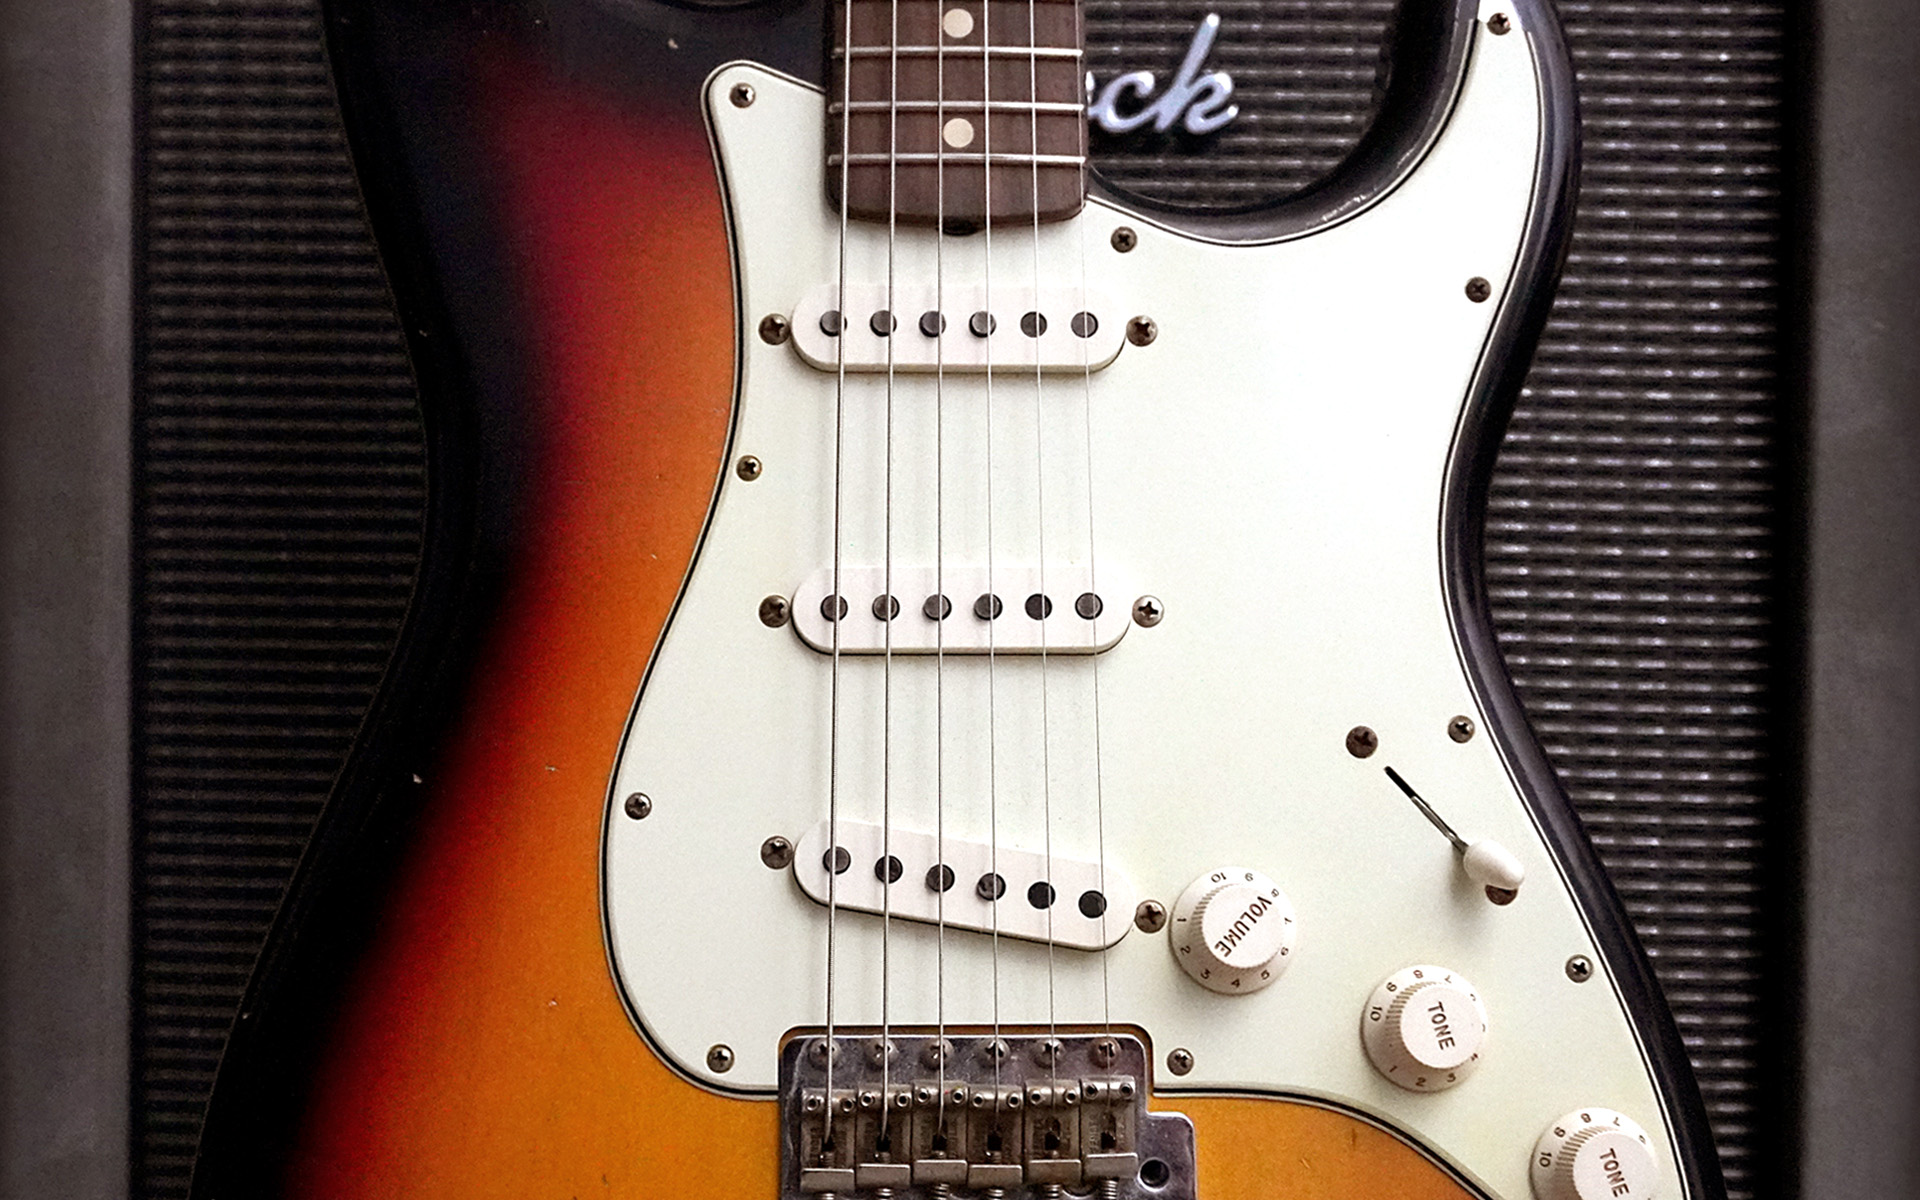 Fender Stratocaster is shown, showcasing the middle pickup, which Mark Hopkins says is a hidden secret!